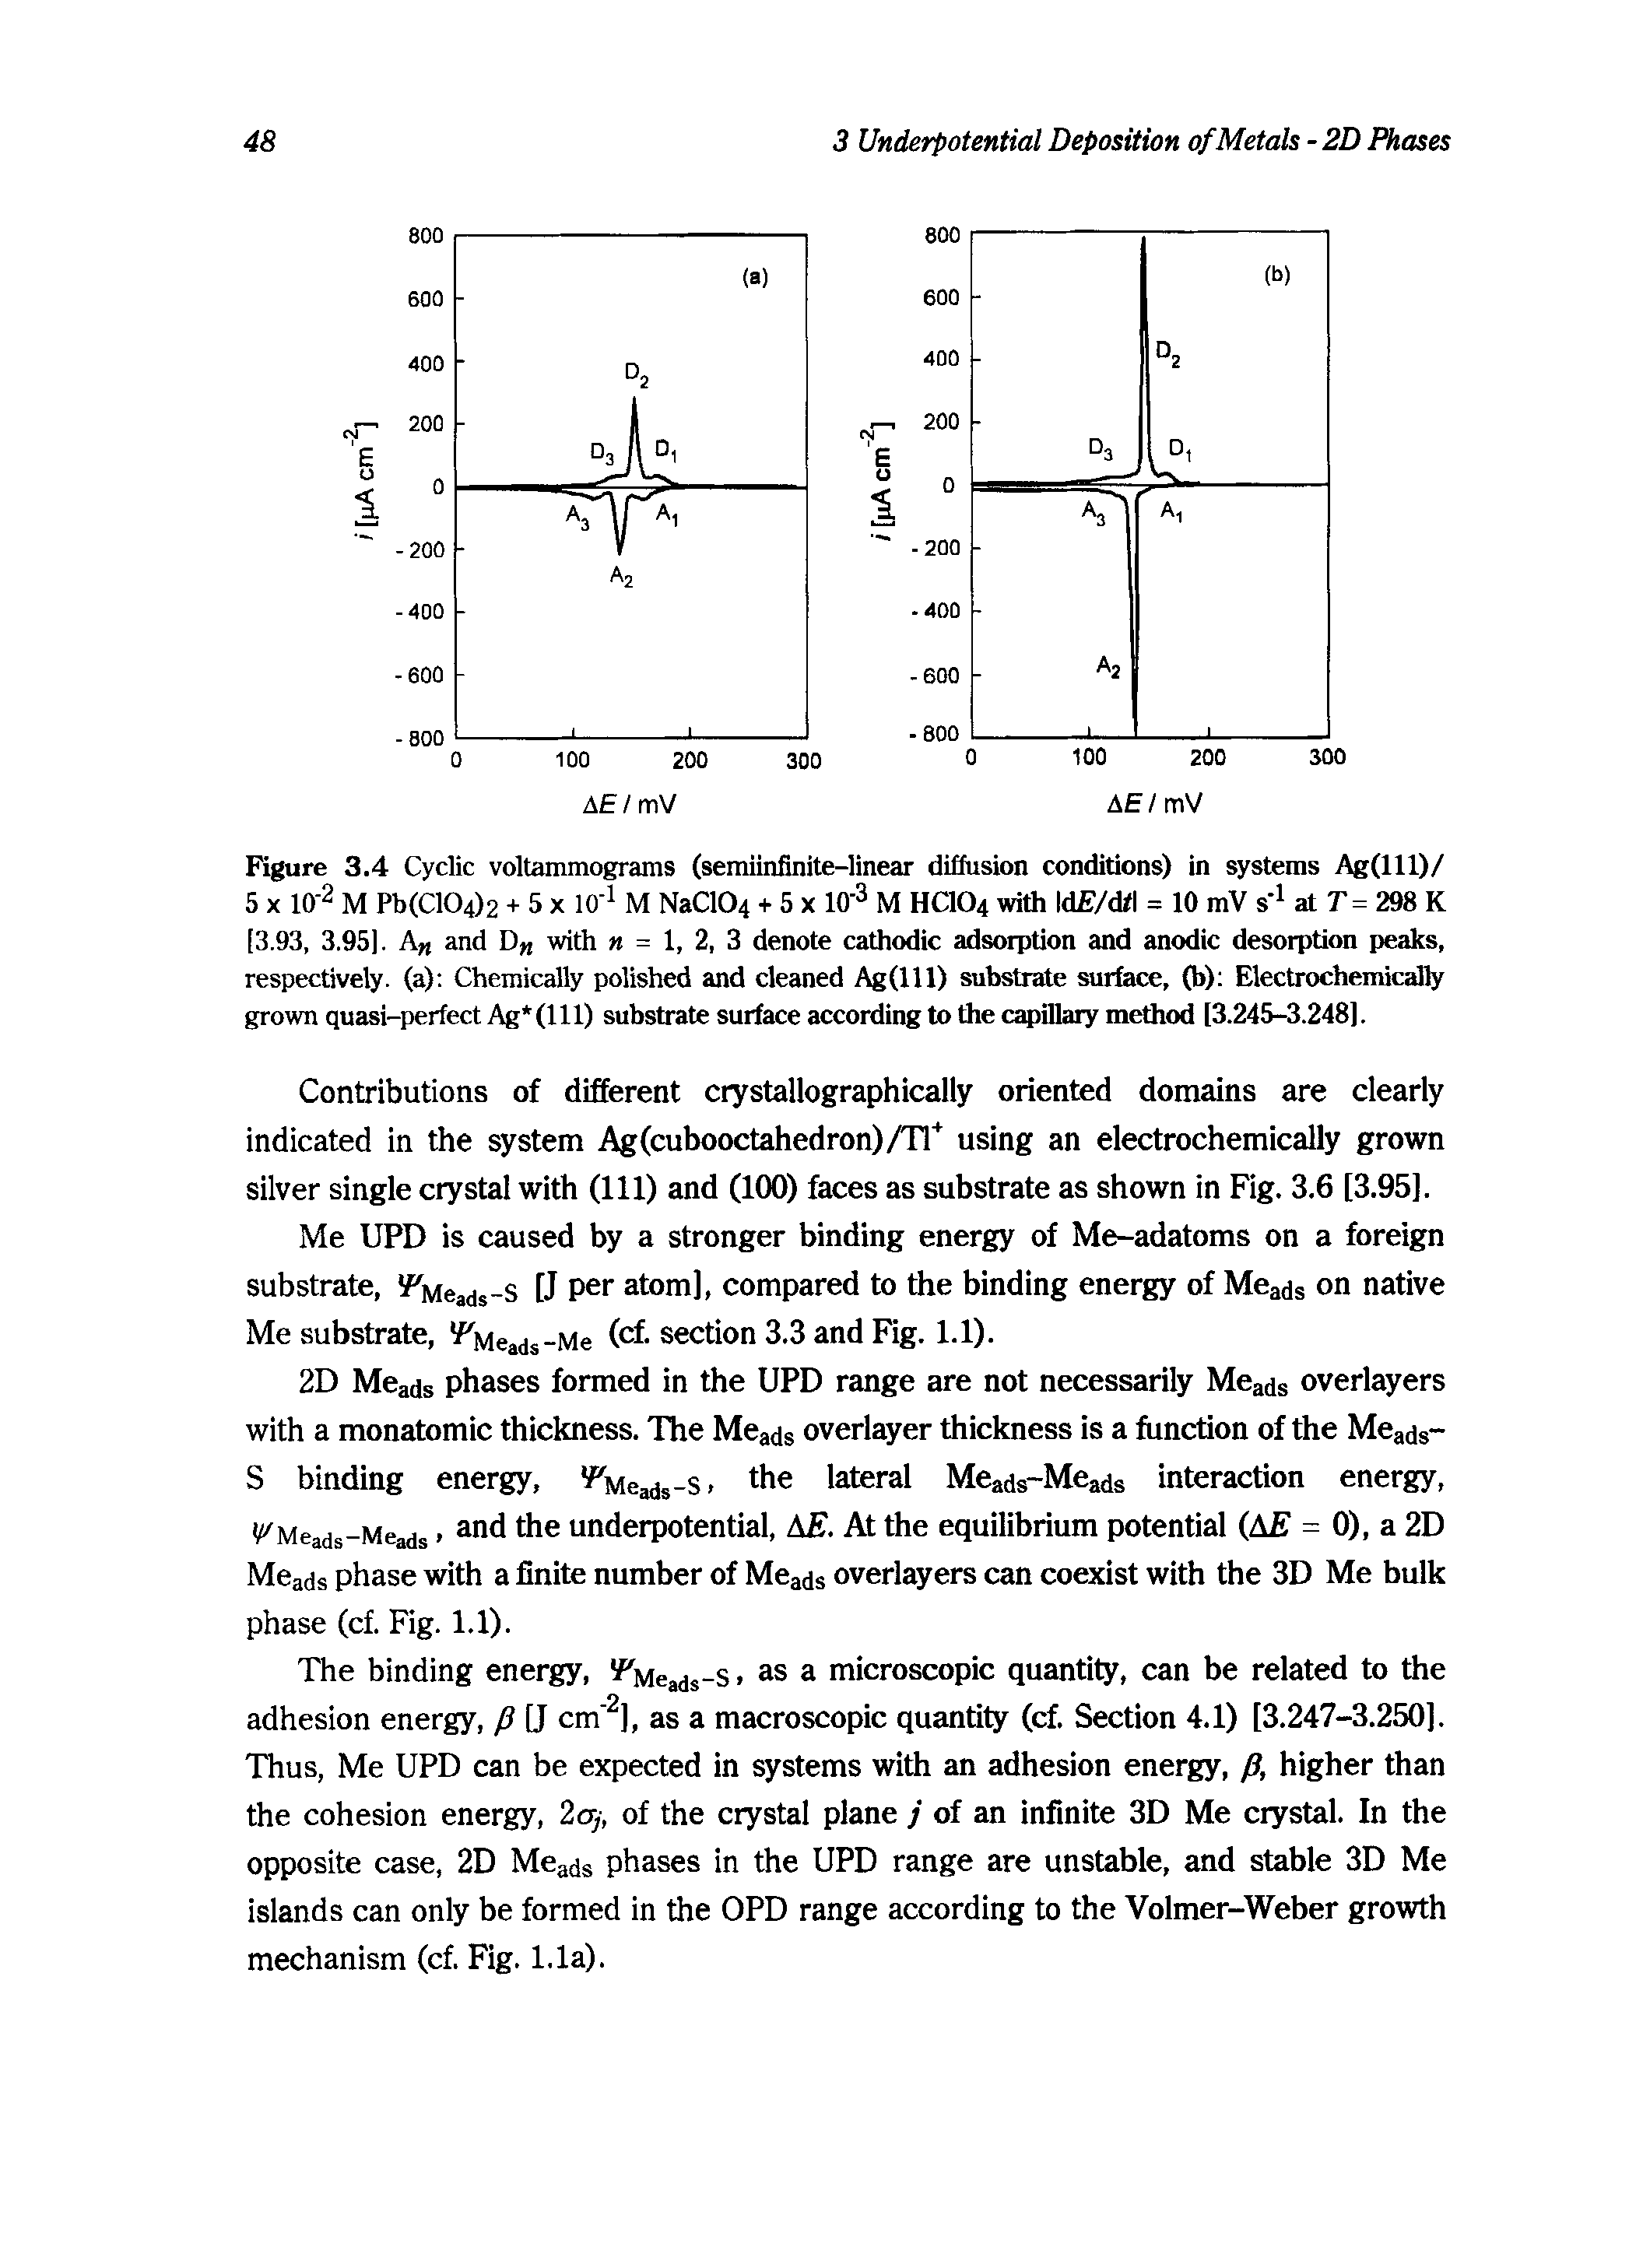 Figure 3.4 Cyclic voltammograms (semiinfinite-linear diffusion conditions) in systems Ag(lll)/ 5 X 10-2 pb(C104)2 + 5 X lO l M NaC104 + 5 x 10 2 M HCIO4 with IdE/d/l = 10 mV s at T= 298 K...